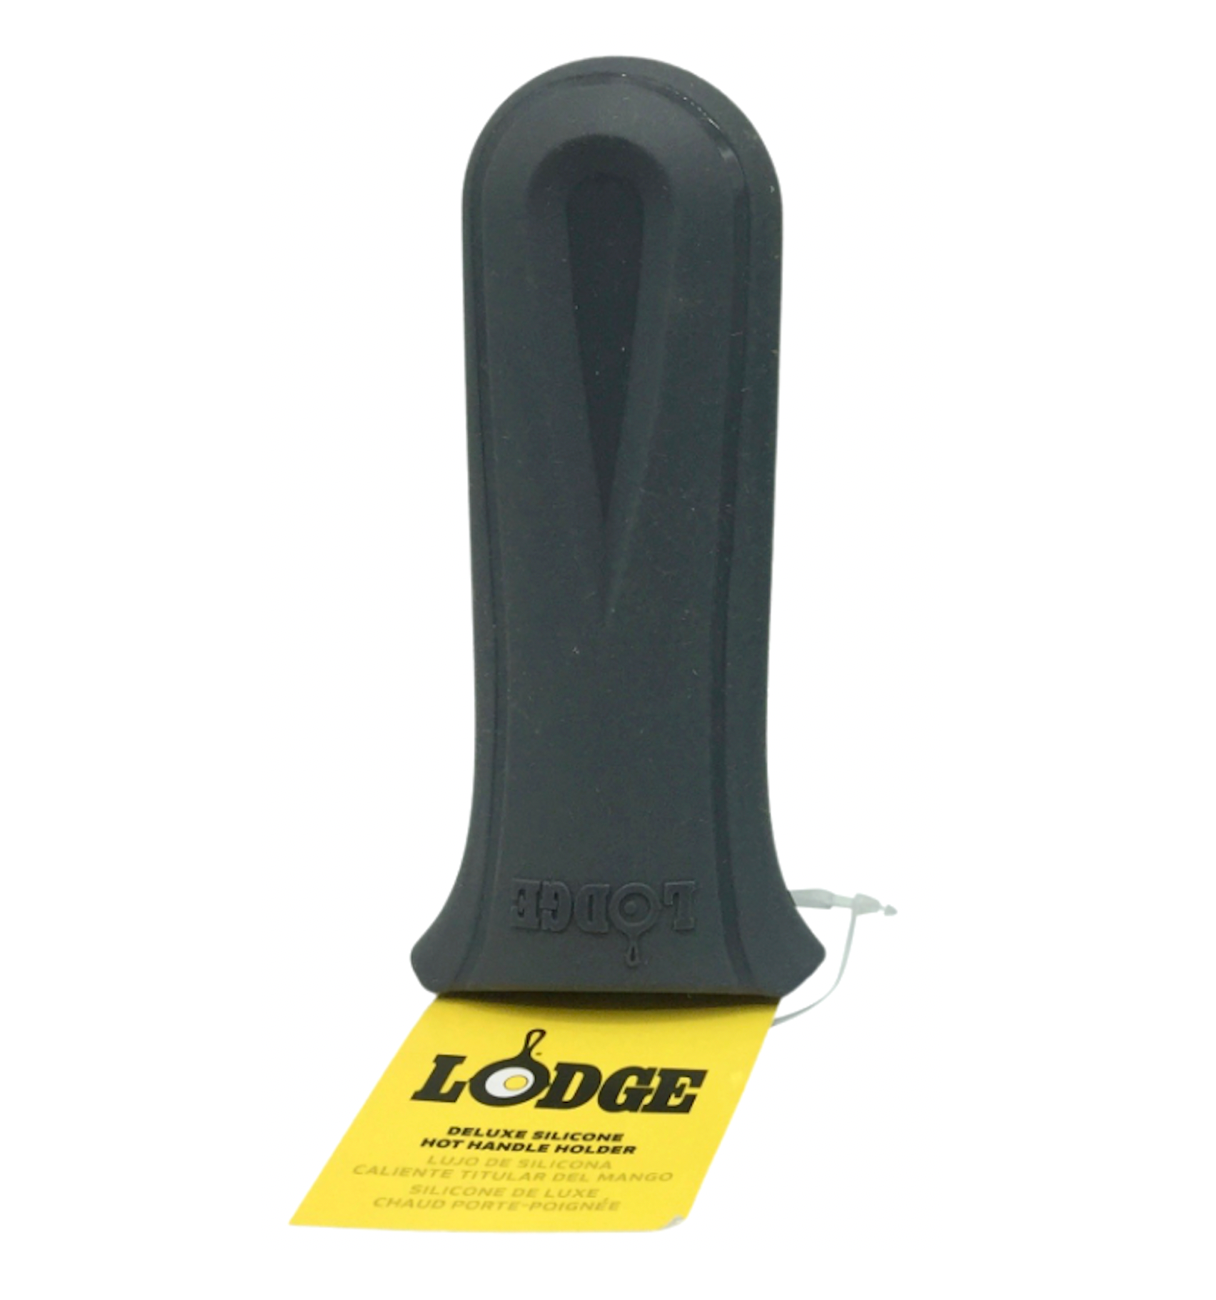 Lodge silicone handle holder deluxe gray